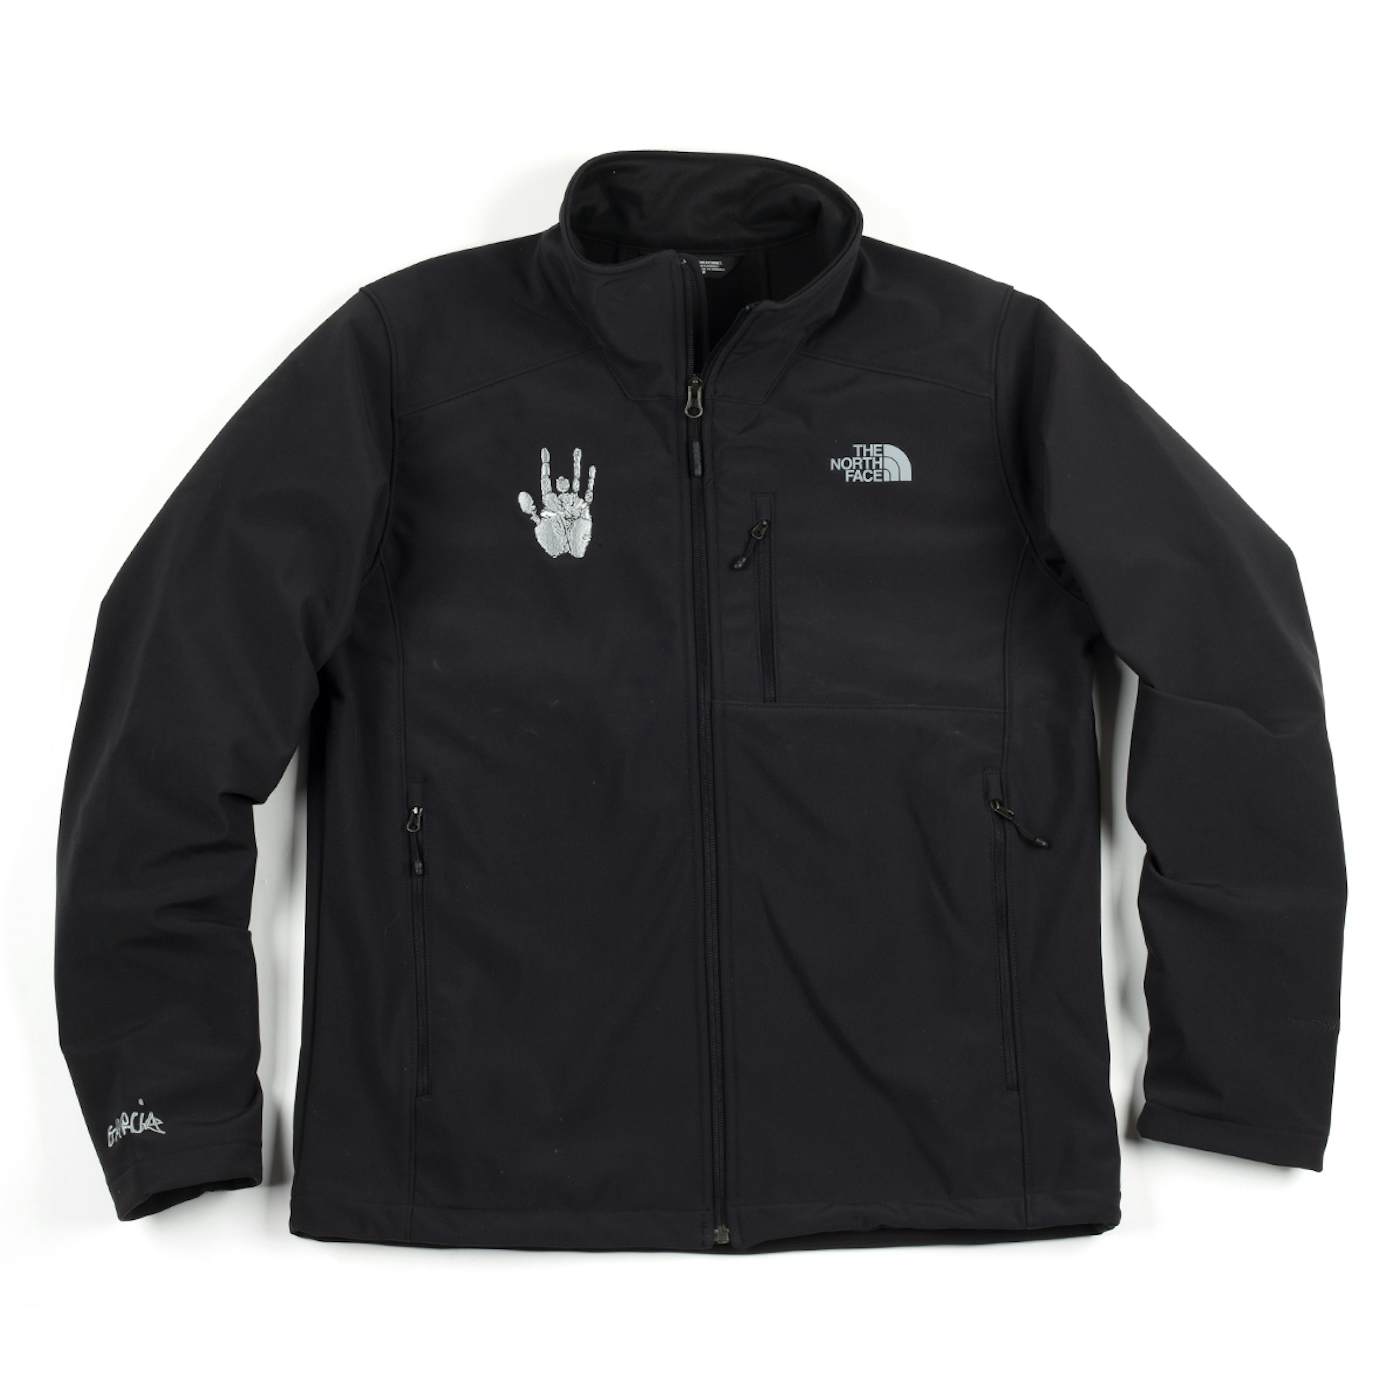 Jerry Garcia North Face Apex Bionic 2 Jacket